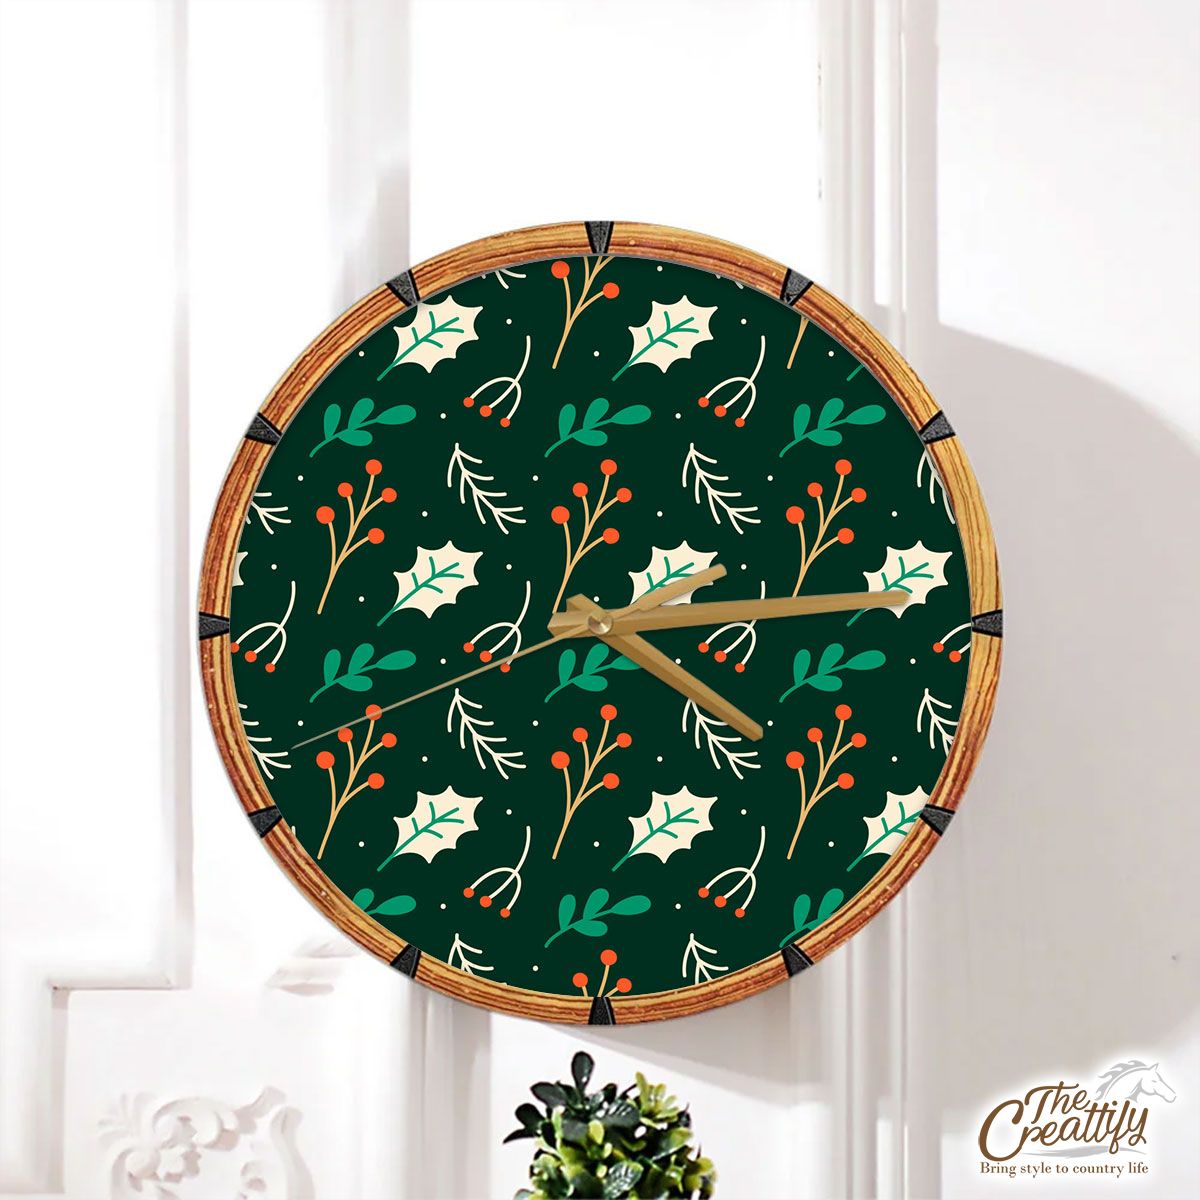 Red Berries And Holly Leaf Pattern Wall Clock